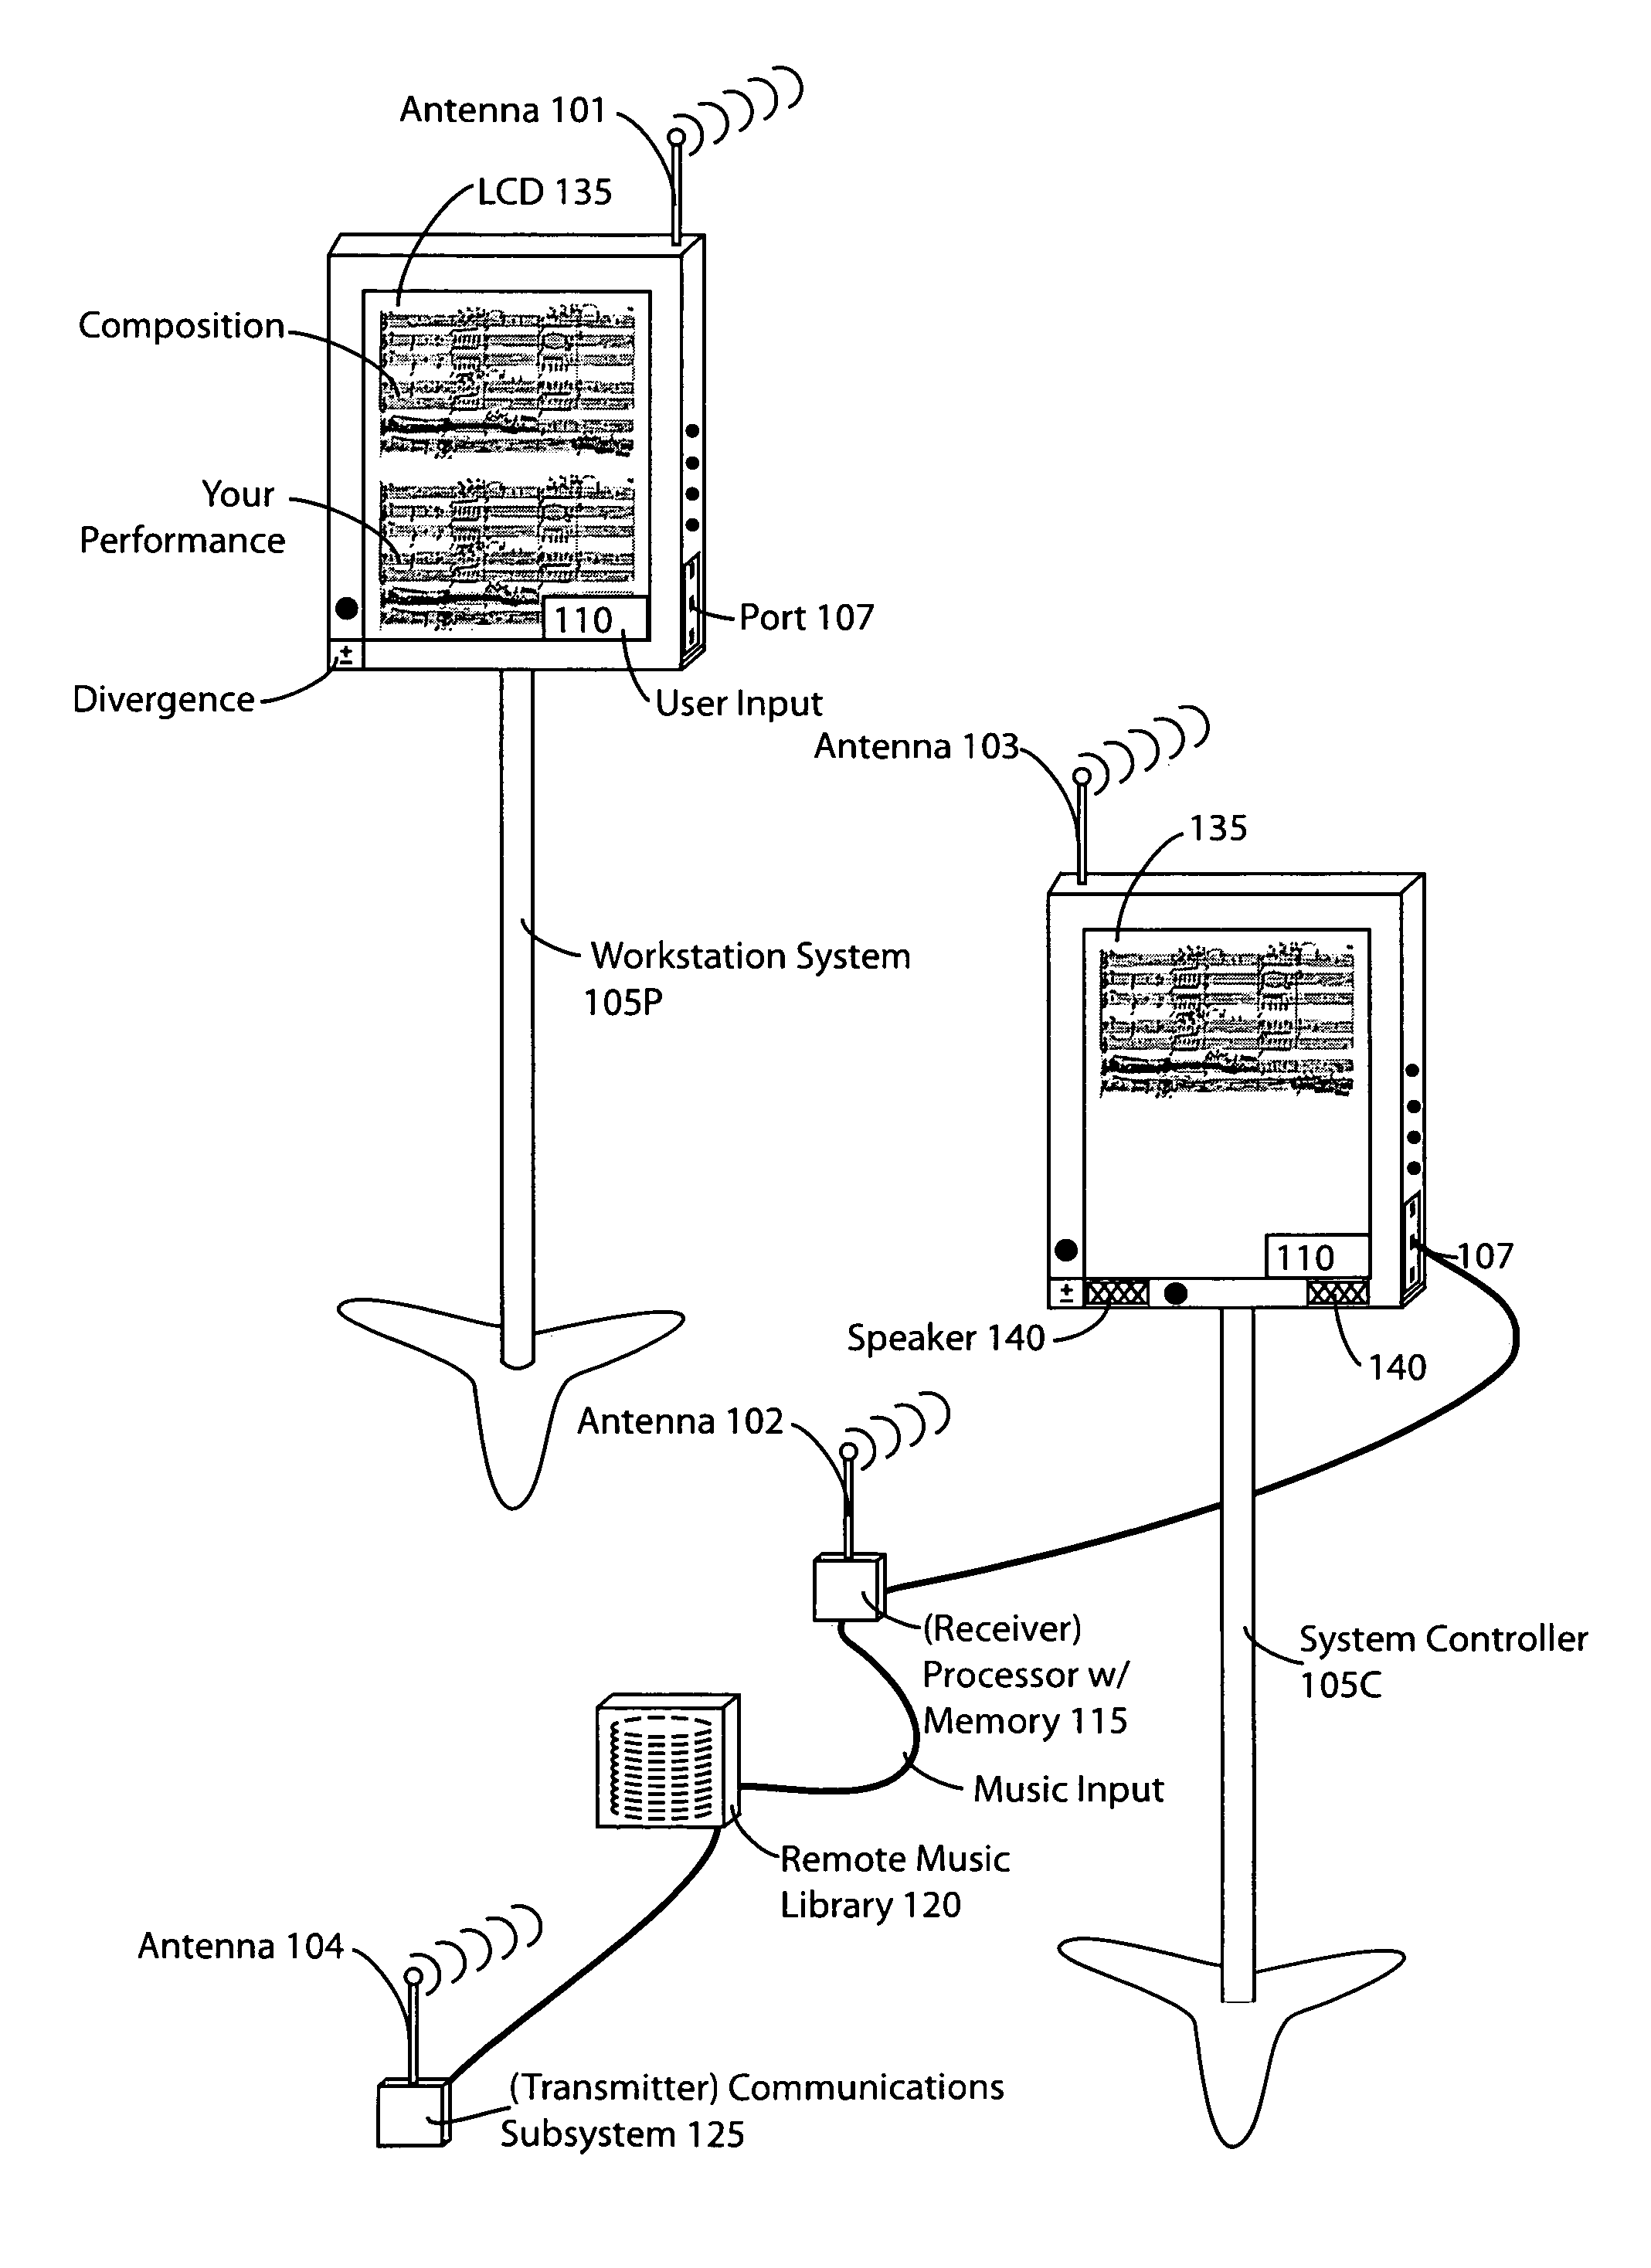 System and methodology for coordinating musical communication and display